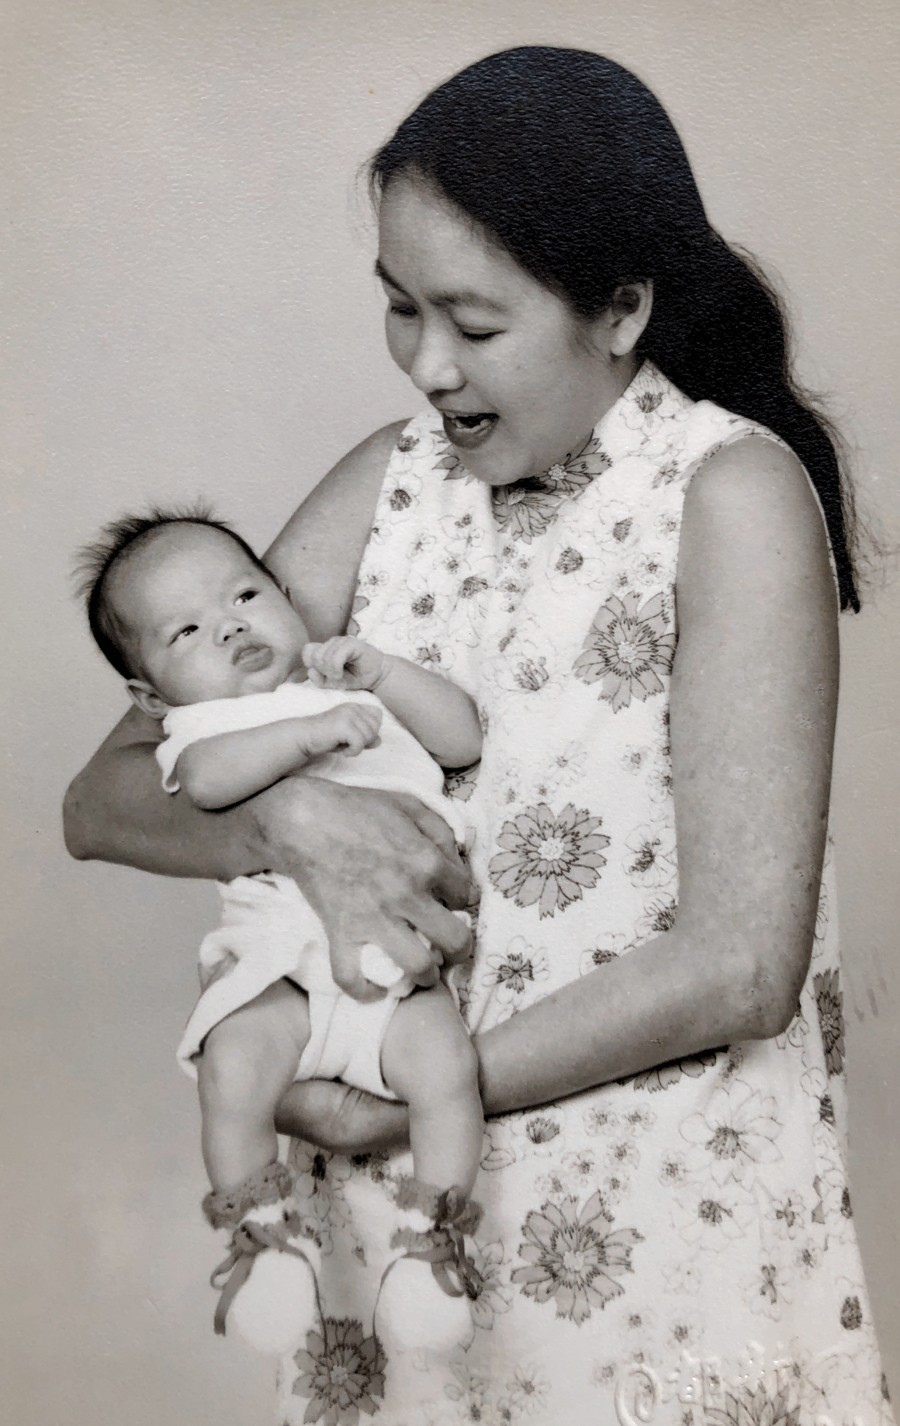 Li-Chuen and Pek-Lin - 'The first year of her life'